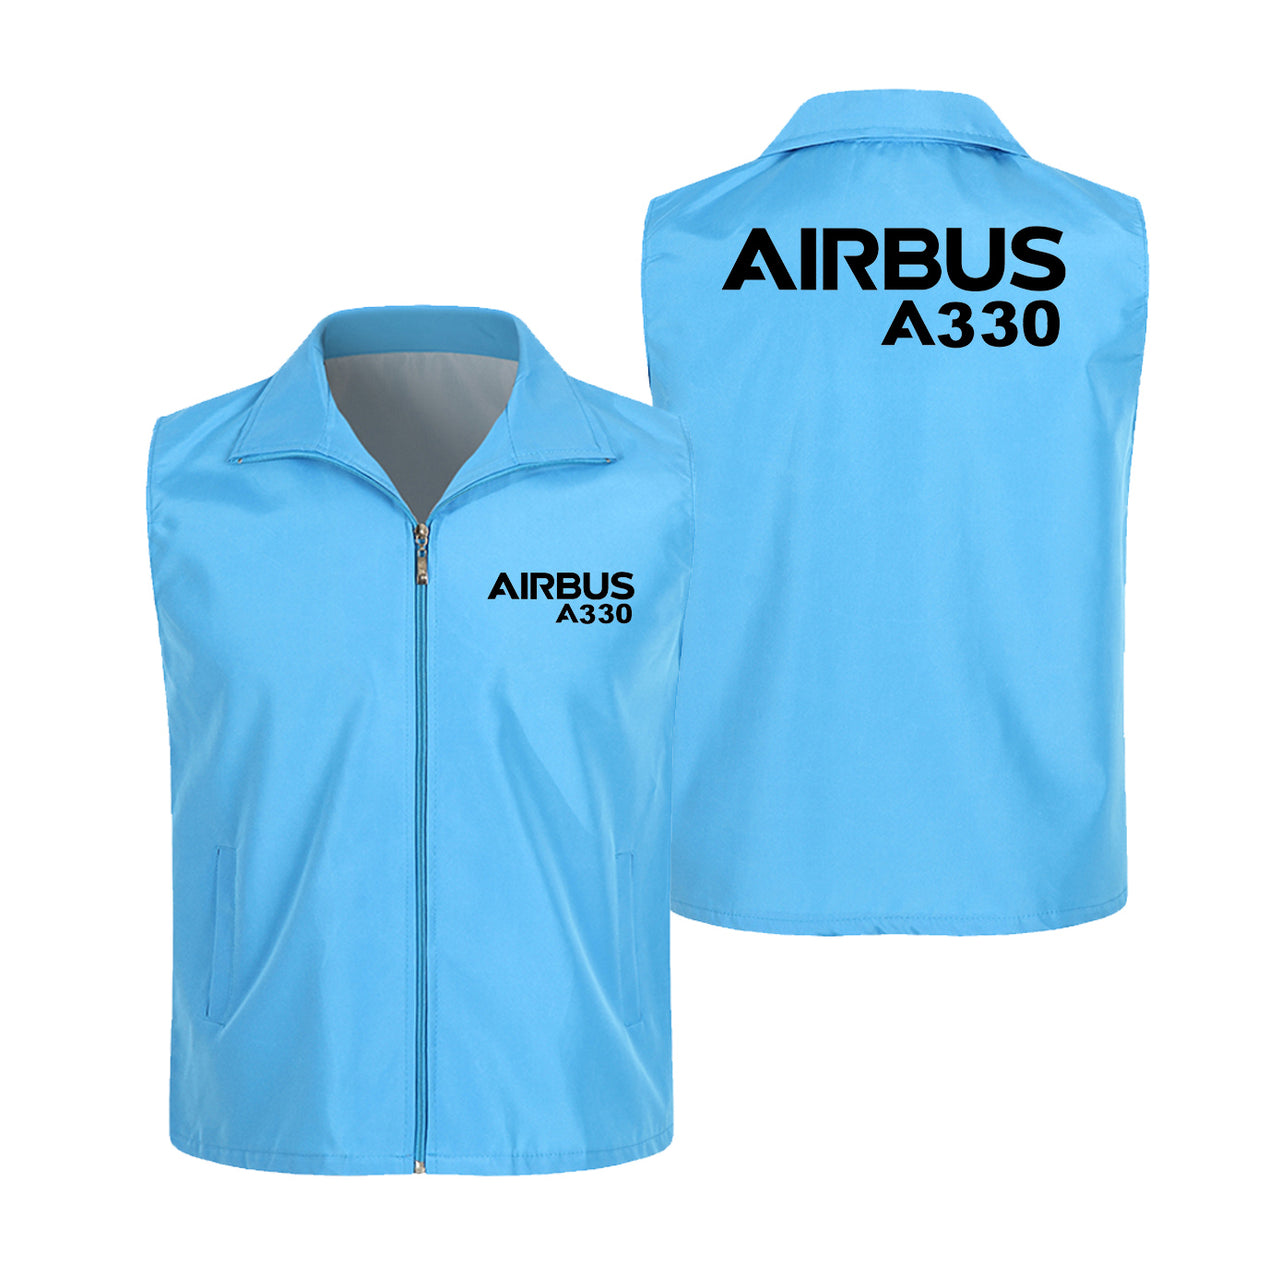 Airbus A330 & Text Designed Thin Style Vests